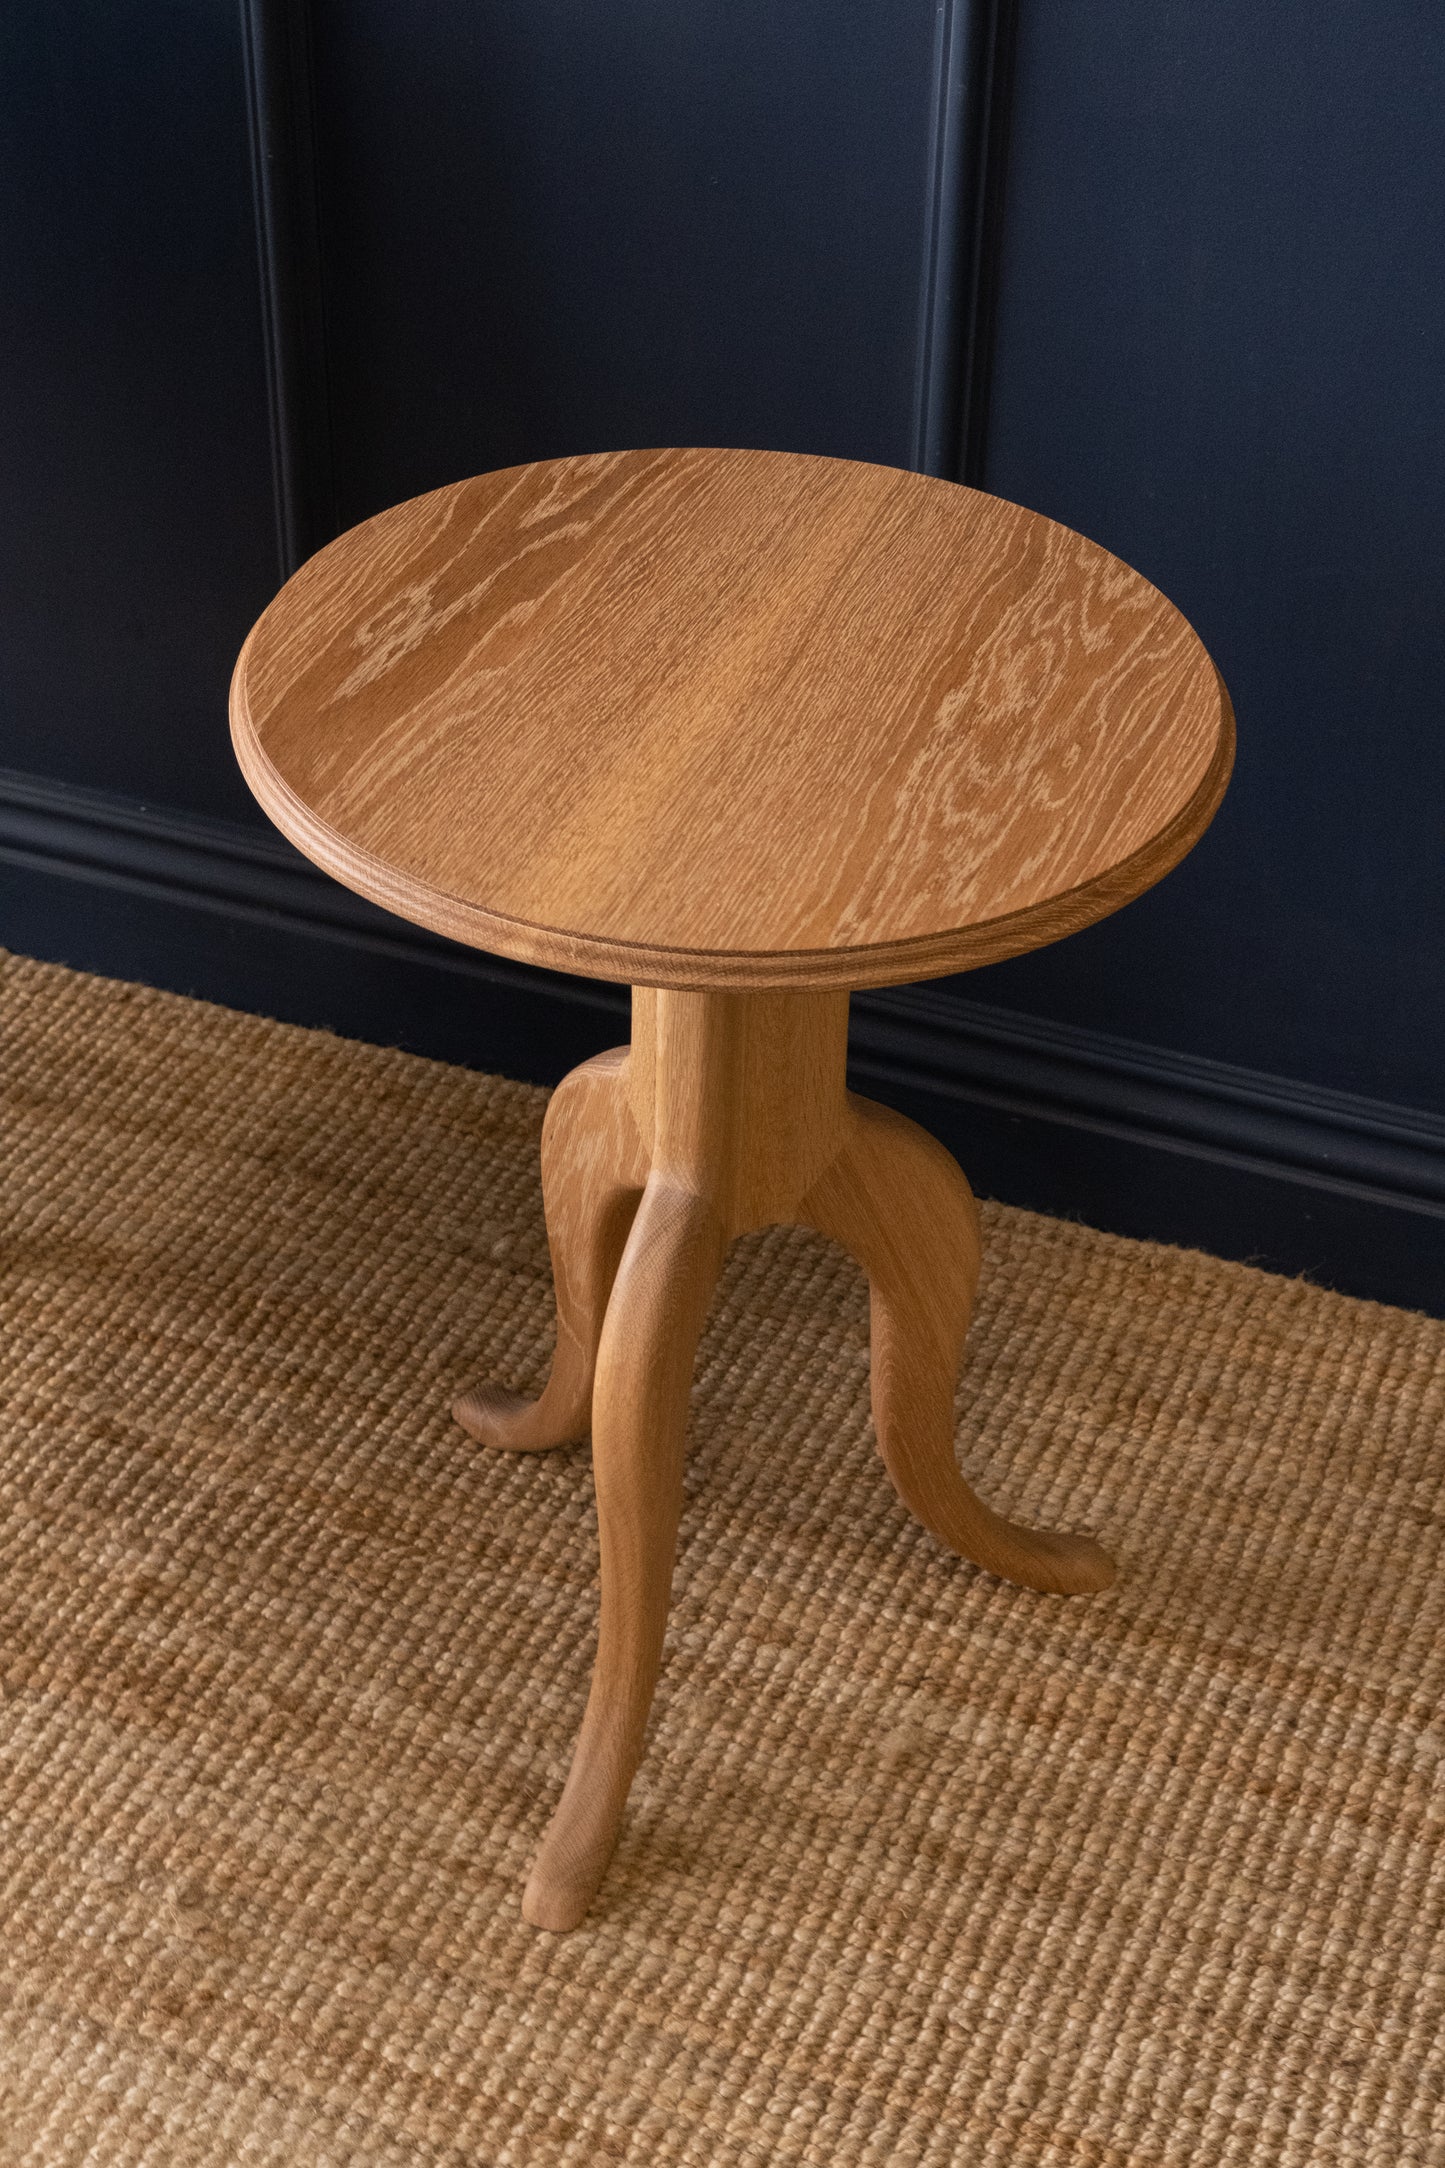 The Evans End Table